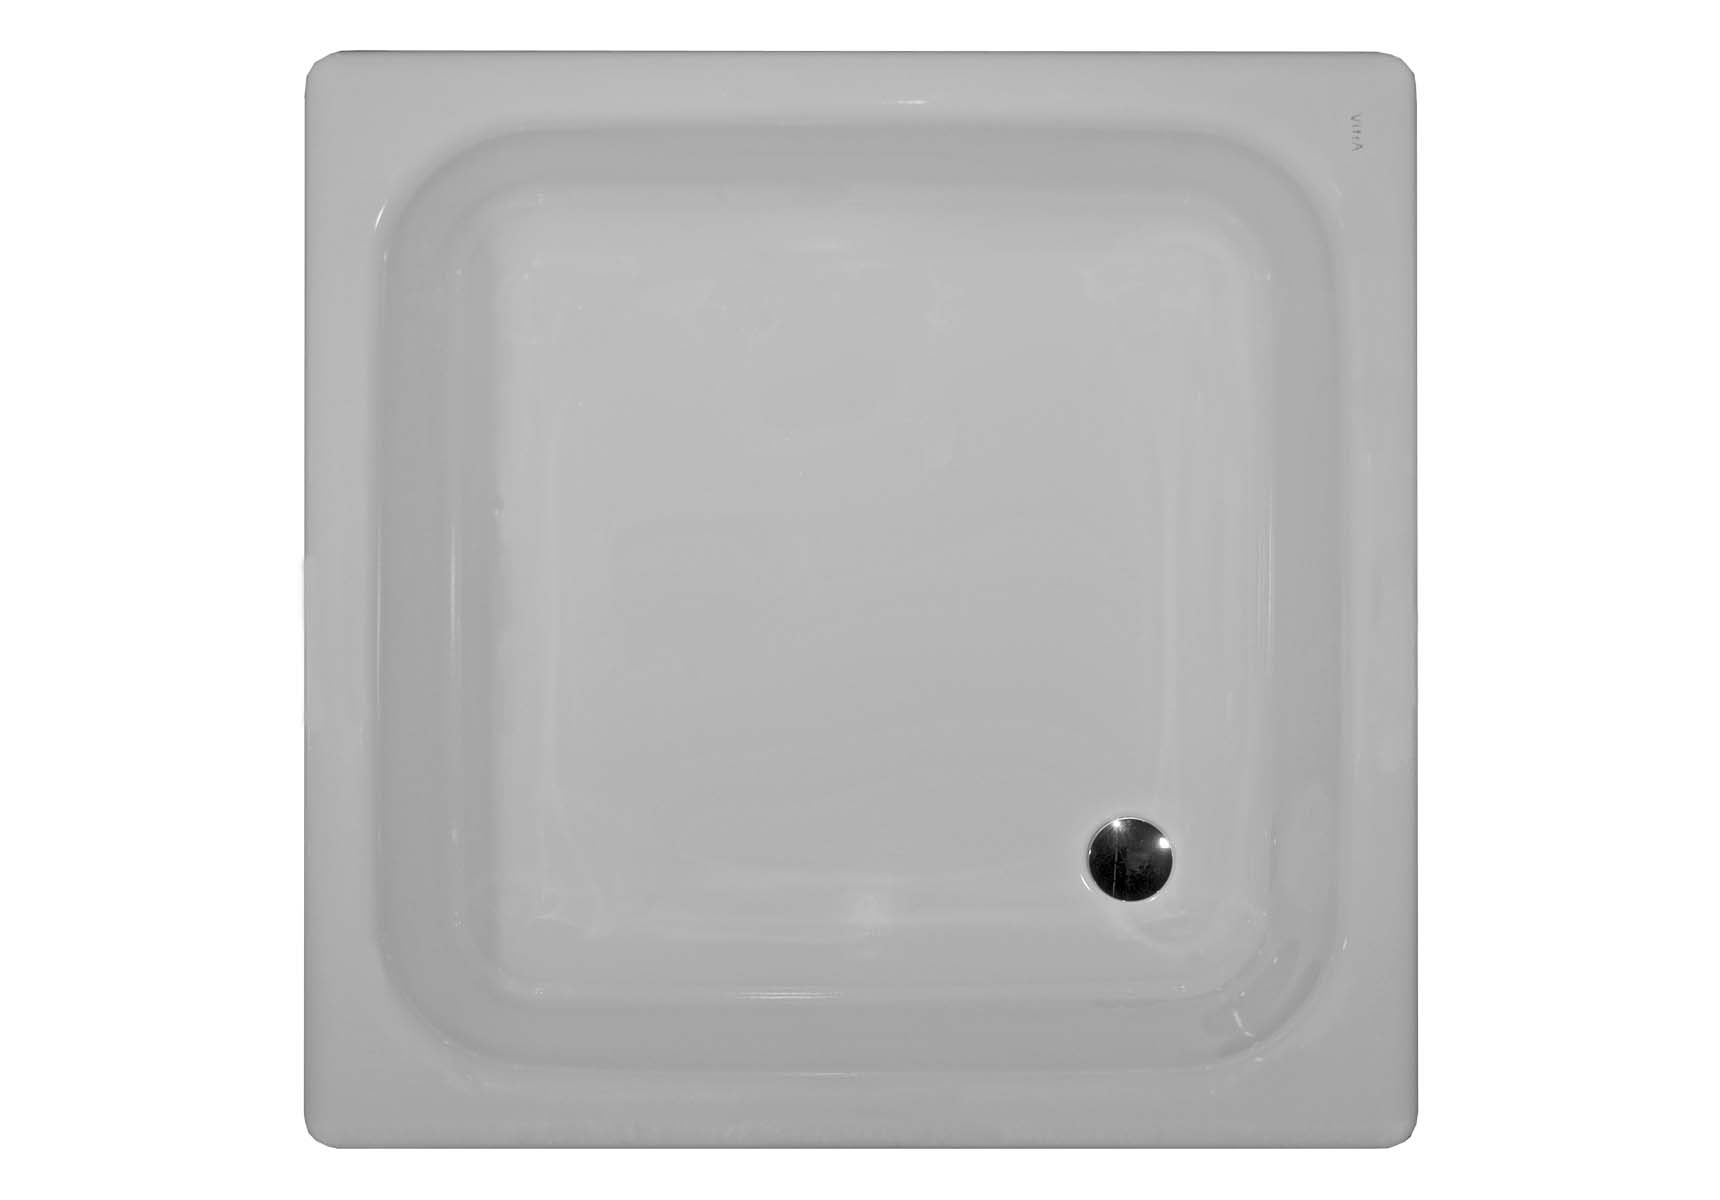 Generic Square 90x90 cm Steel Shower Tray, 3.5 Mm, H:16 cm, 52 Mm Waste, Sound Proofing Pad